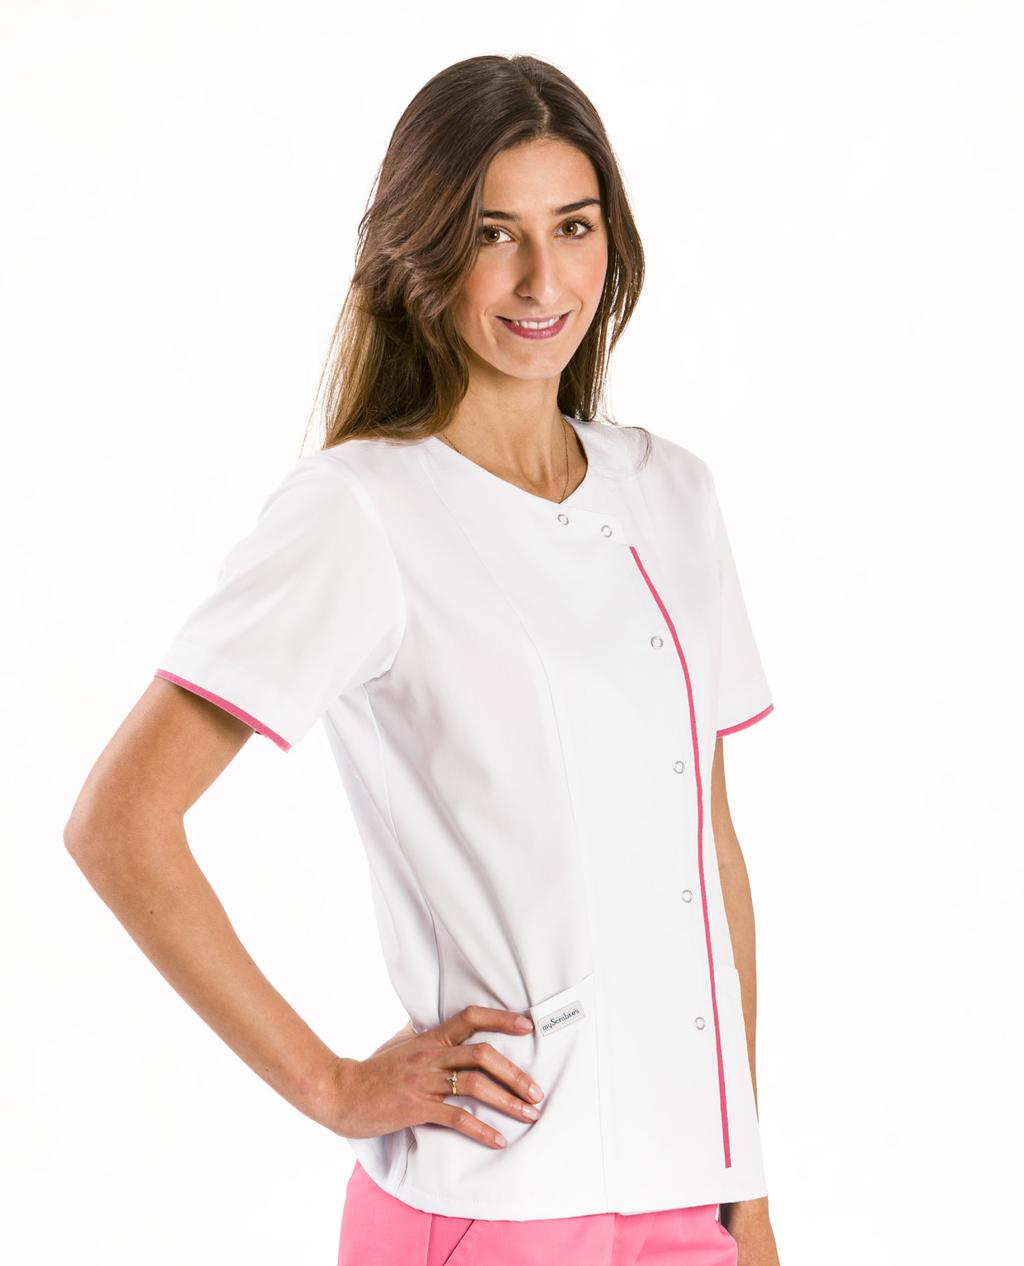 Women s medical tunic short, with a fastening, 2 pockets LC-10 LENGTH OF THE SLEEVE / LONG 84 90 94 92 98 96 102 100 106 104 110 65 58